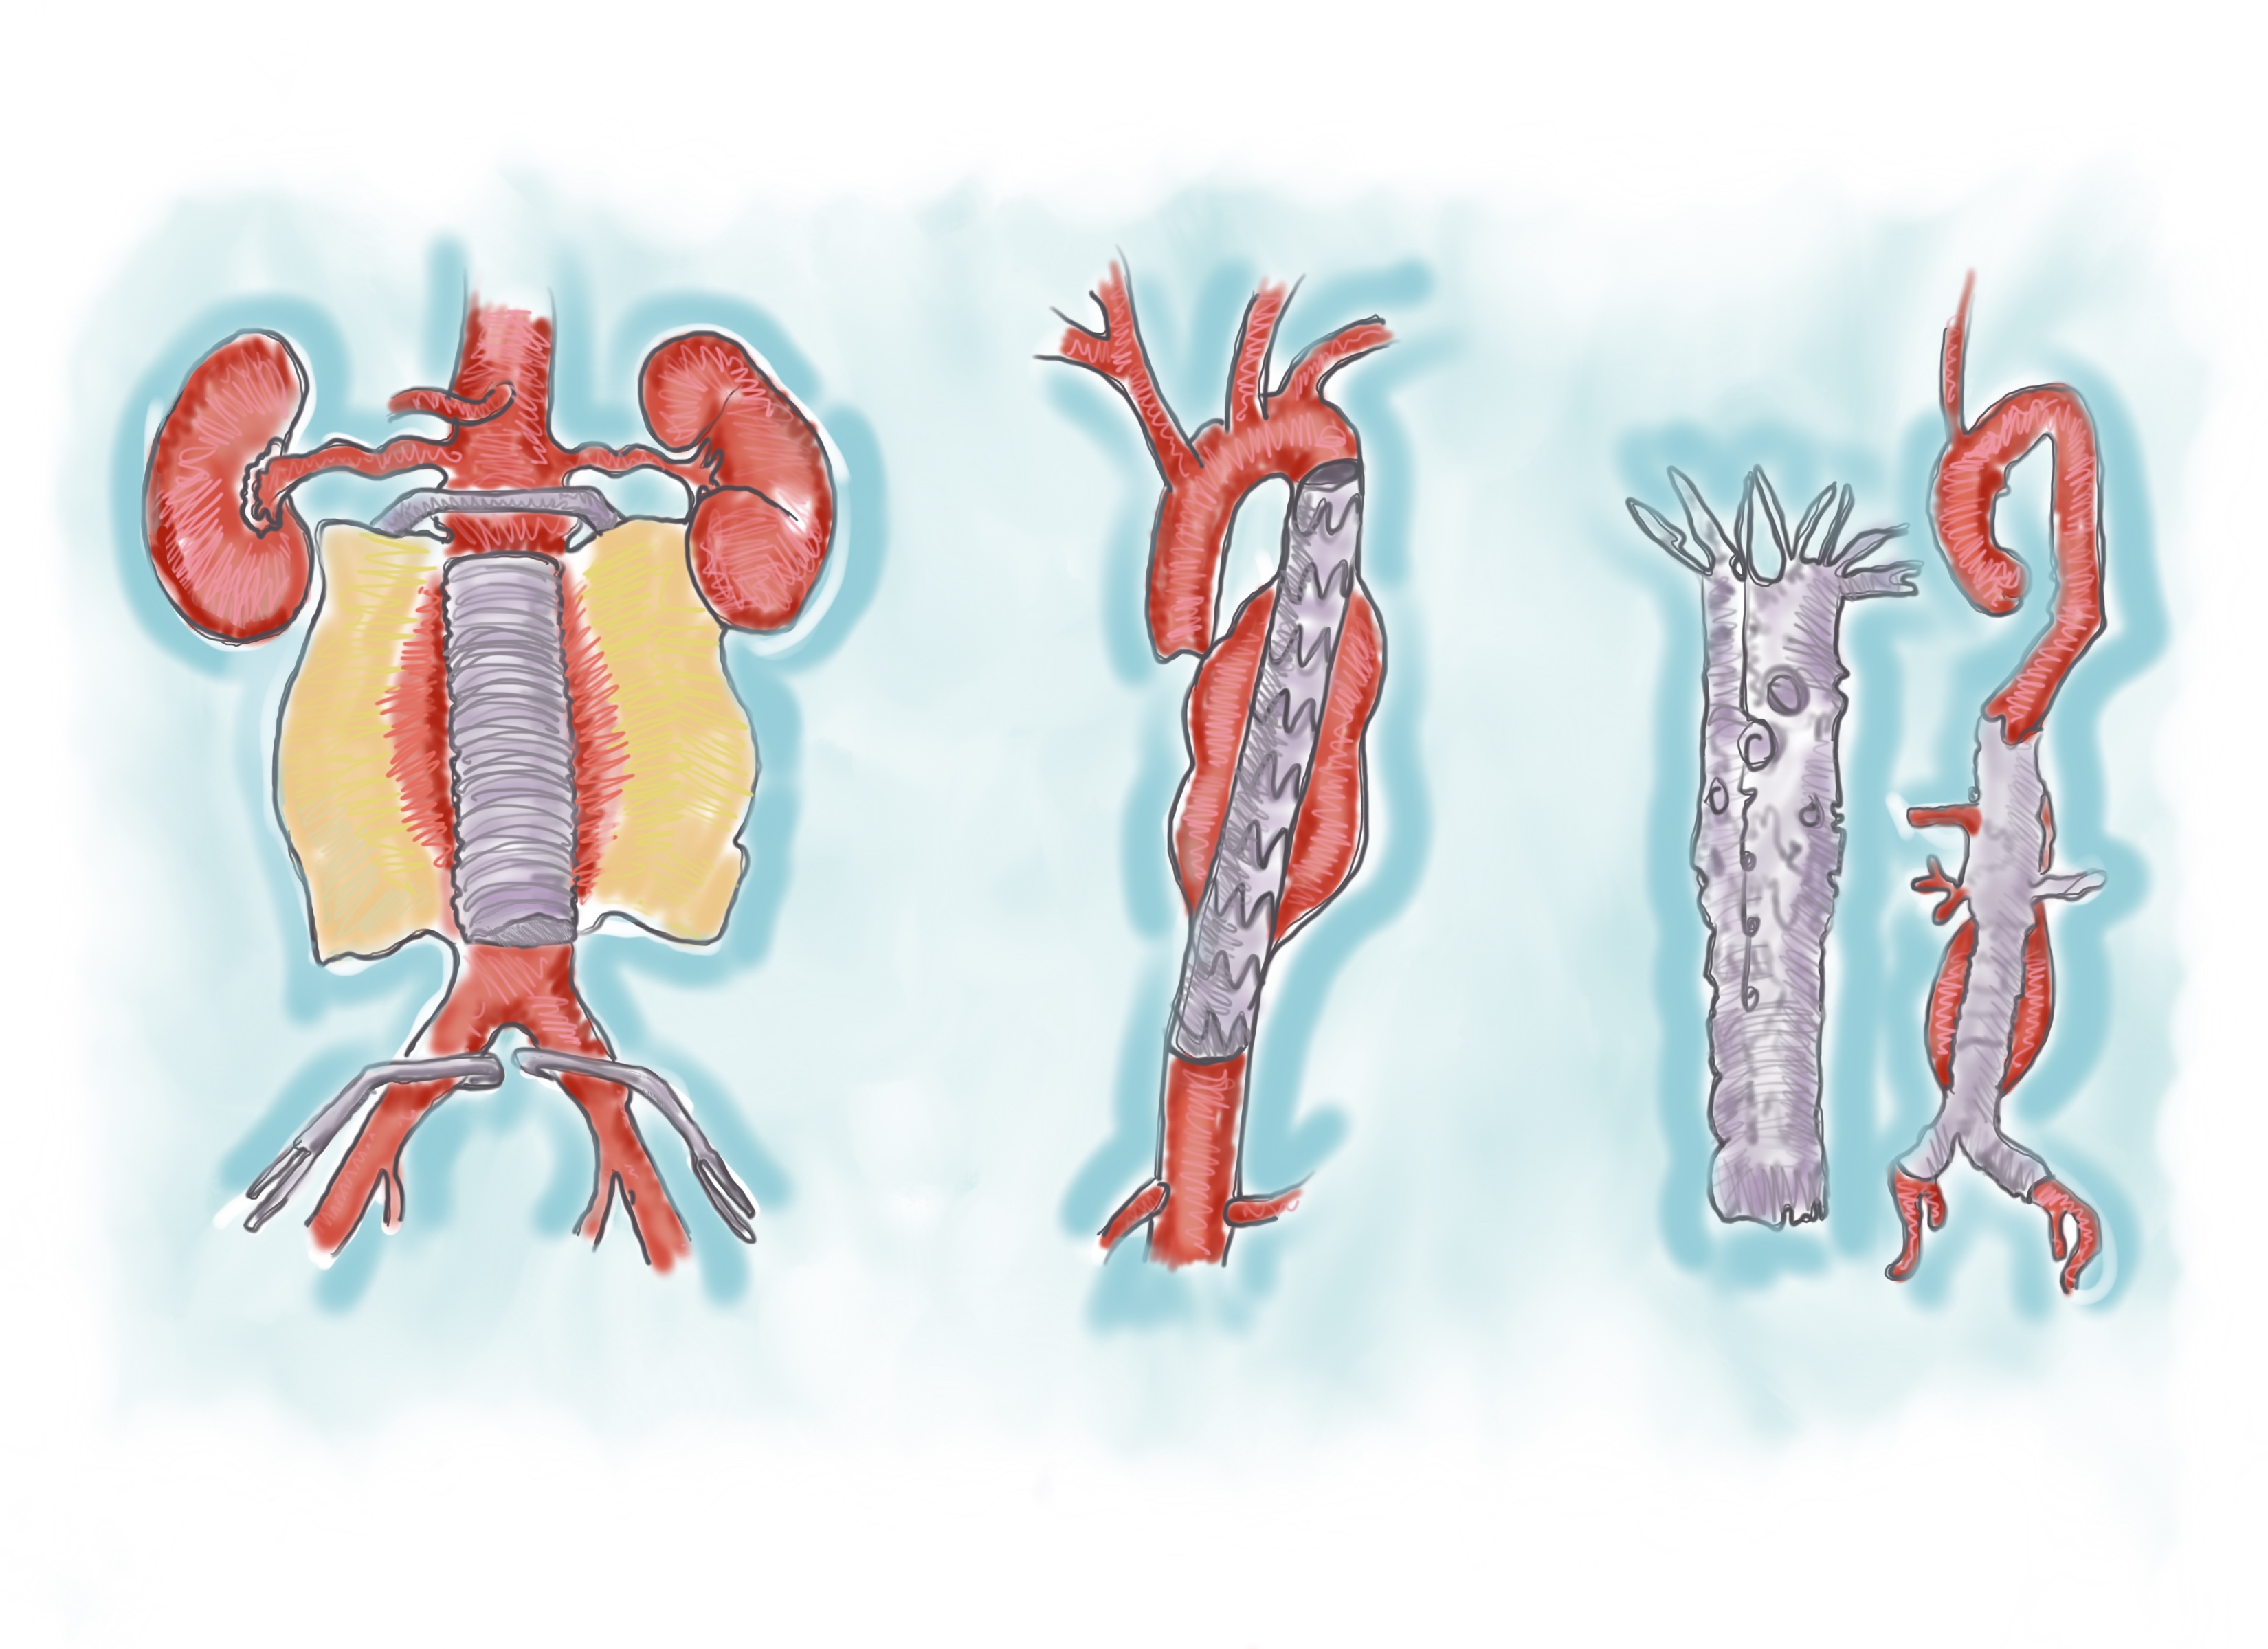 Three ways of repairing abdominal aortic aneurysms: (from left) traditional open surgical repair, endograft for AAA repair, fenestrated endograft.